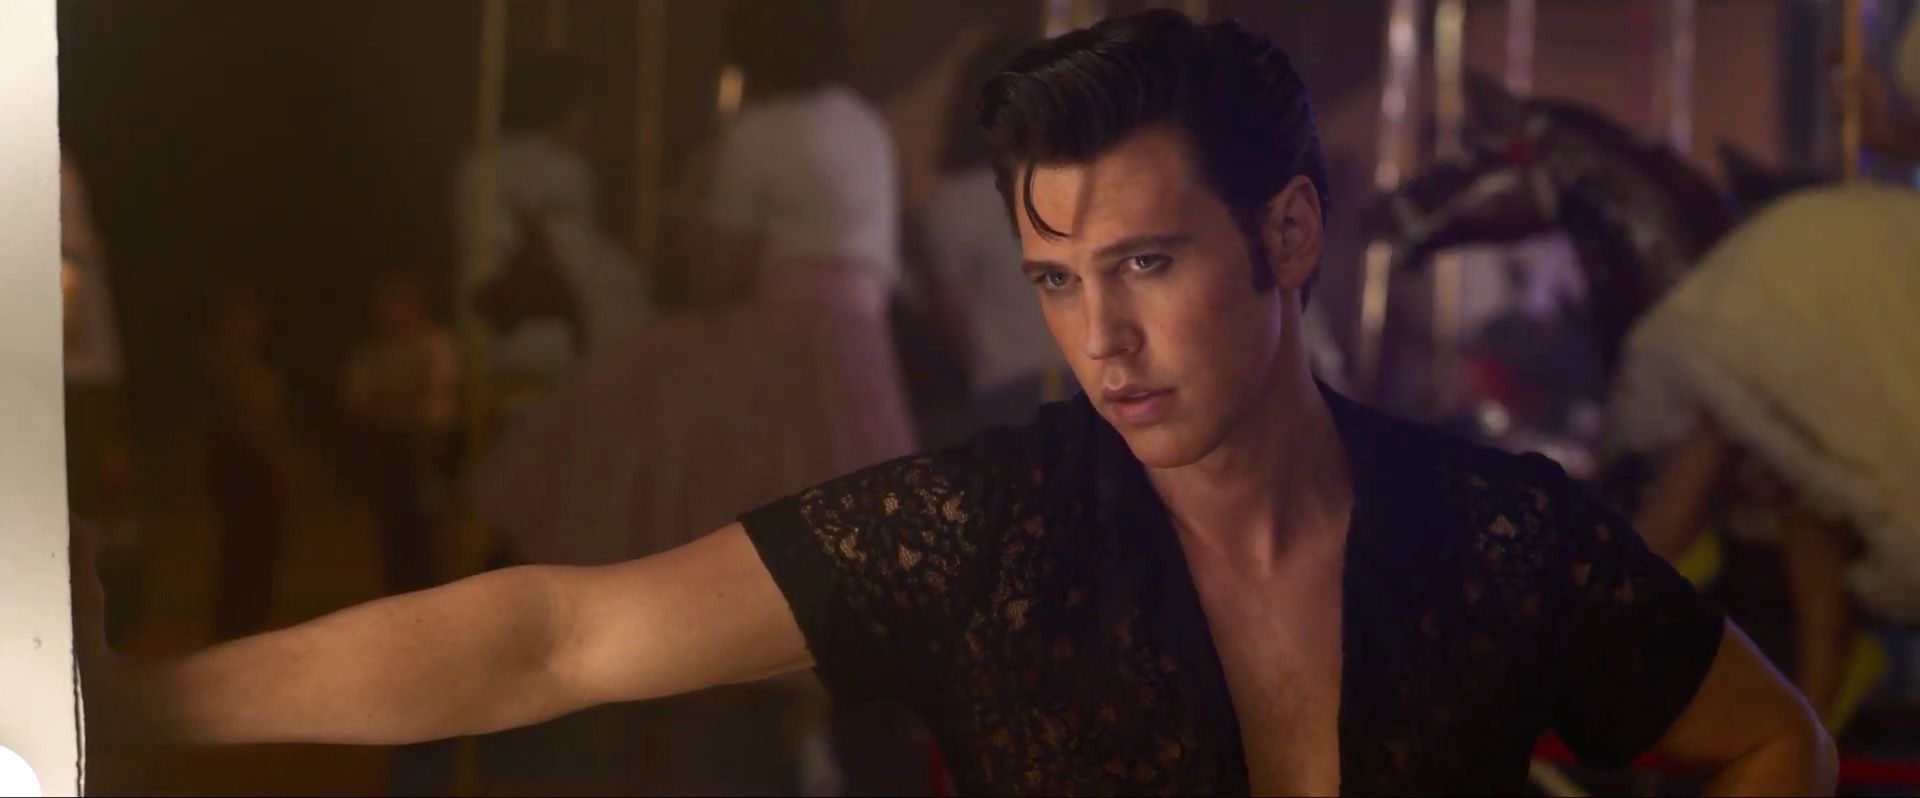 Where to Watch the Oscar-Nominated Movie Elvis With Austin Butler